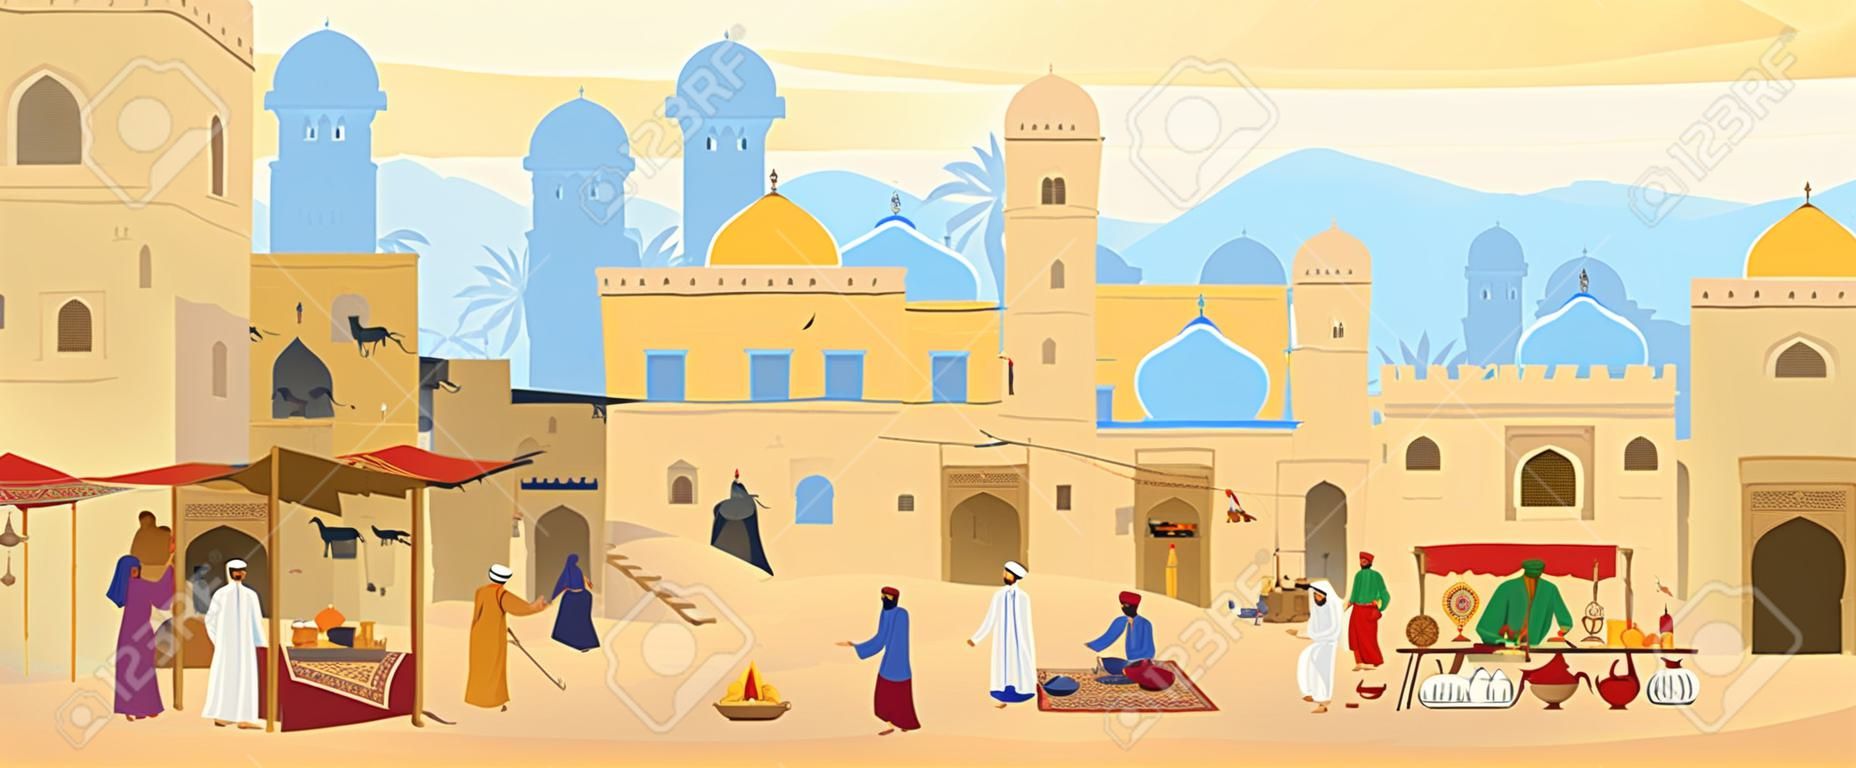 Vector Flat illustration of Middle Eastern Town. Arabic desert landscape with traditional mud brick houses and people. Street Bazaar With Carpets, ceramics, fruits, spices. islamic architecture.